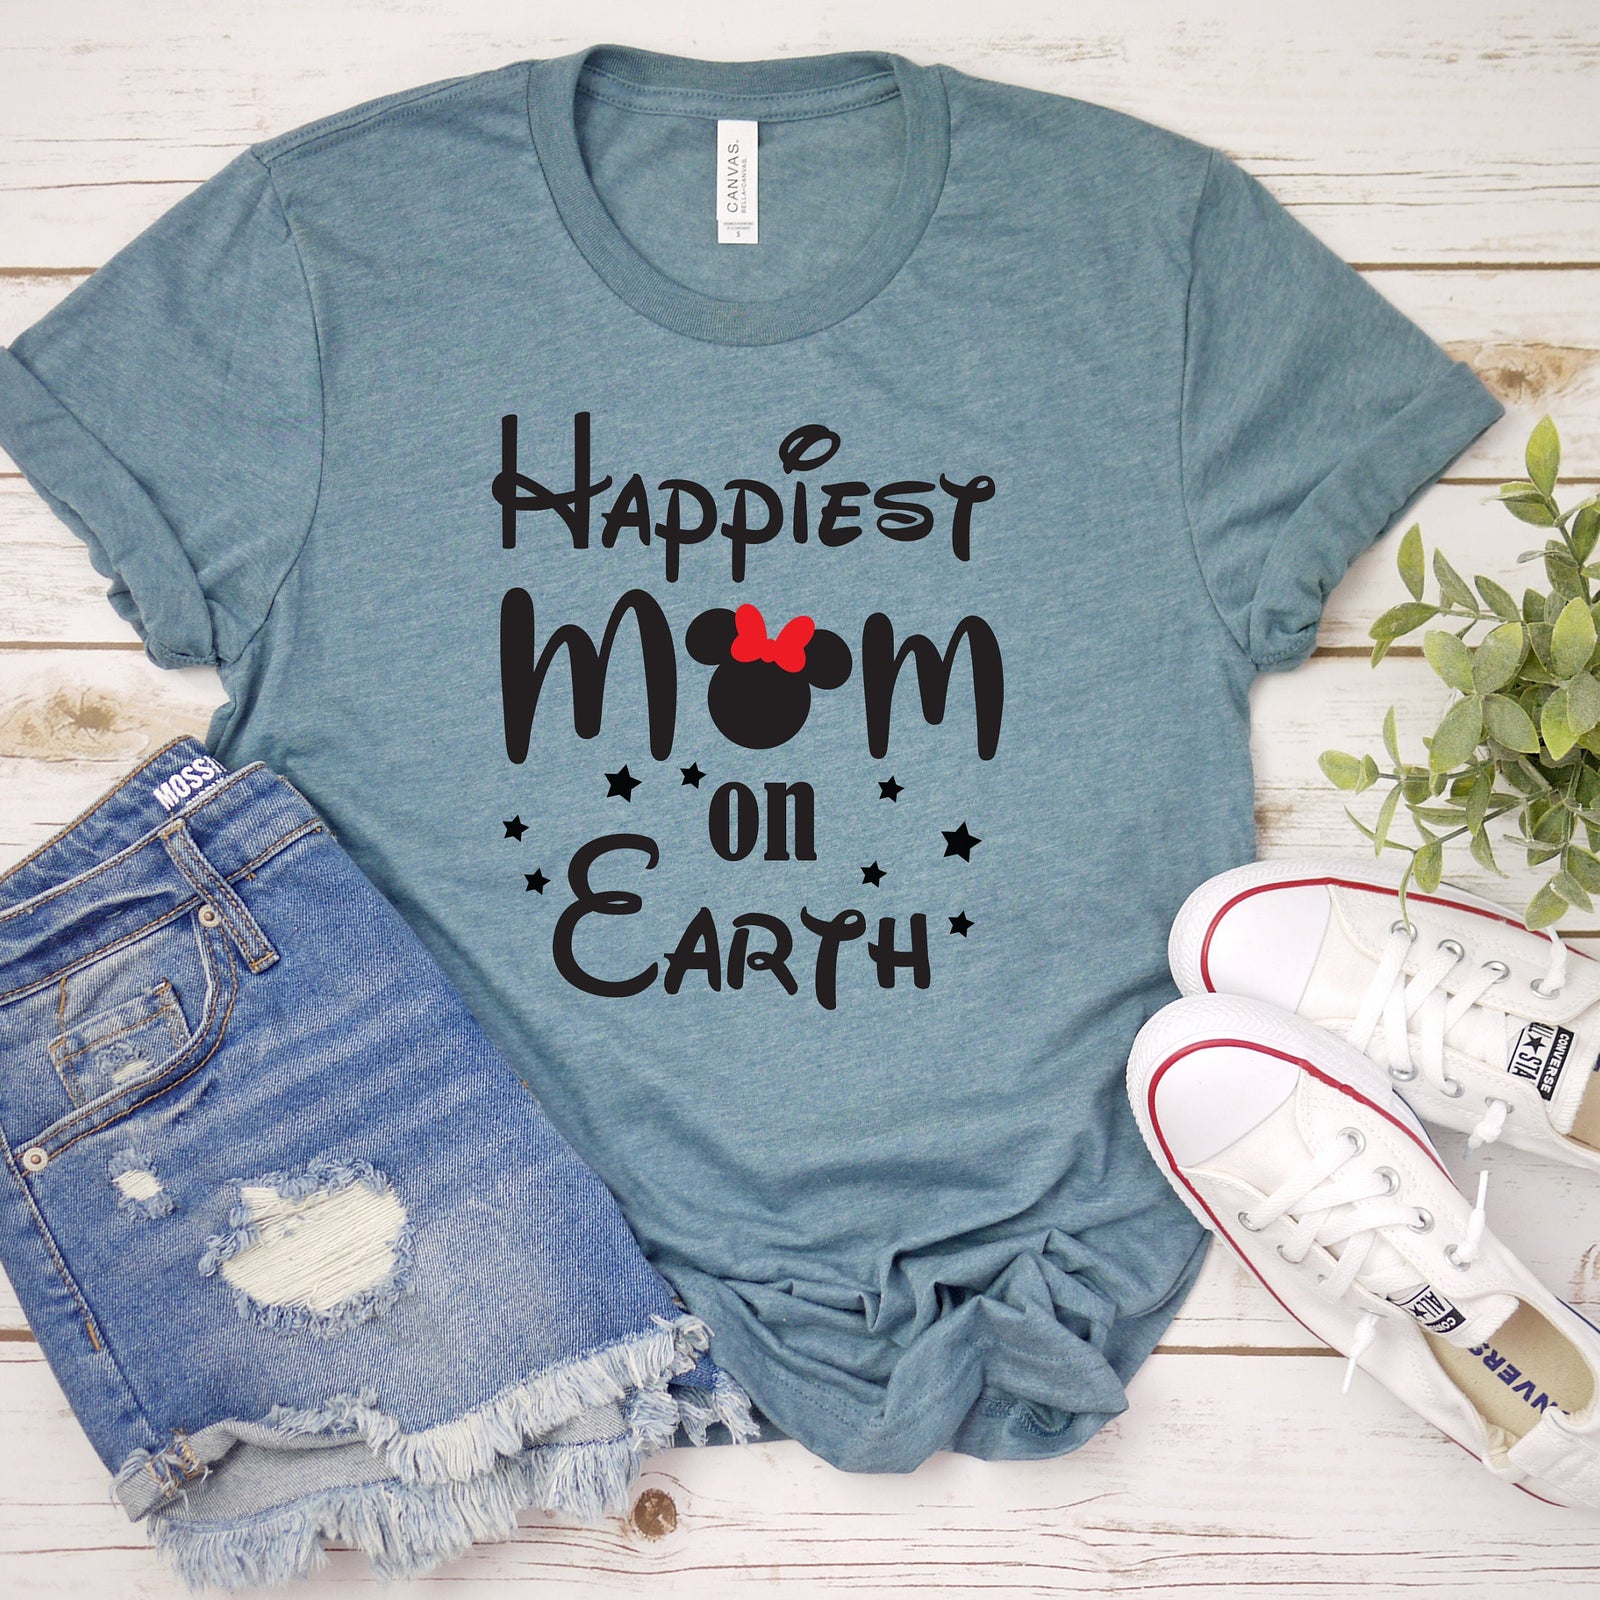 Happiest Mom on Earth Minnie Mouse Adult T Shirt- Disney Bound - Fun Family Shirts